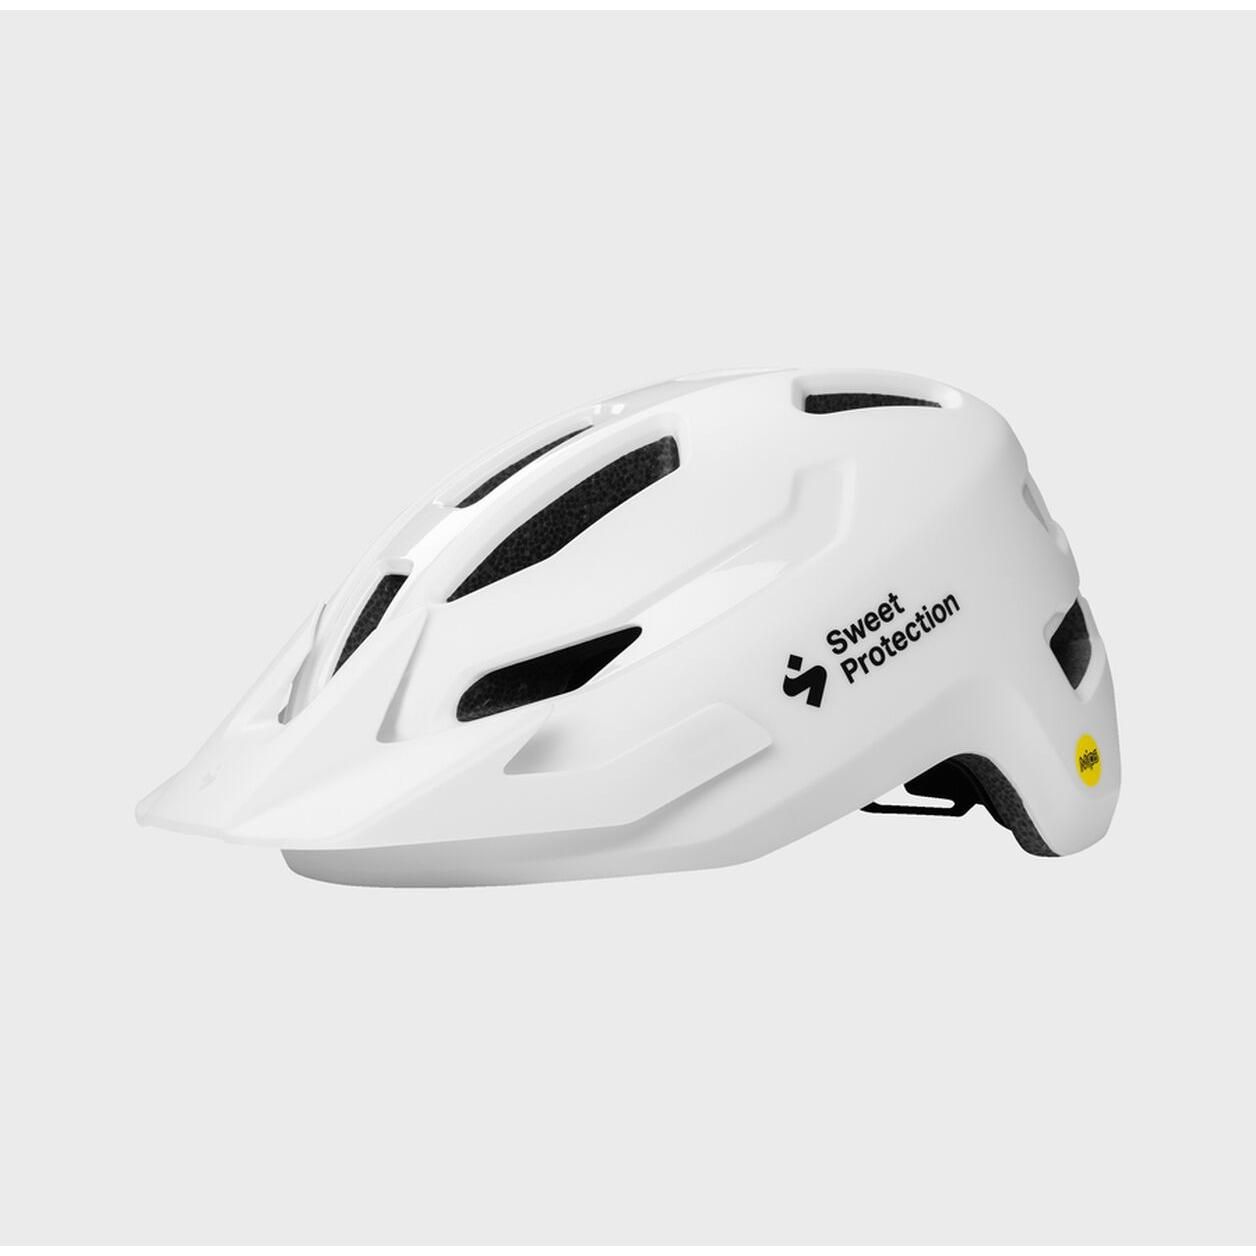 /images/845106_Ripper-MIPS-Helmet_MWHT_PRODUCT_1_Sweetprotection.jpg